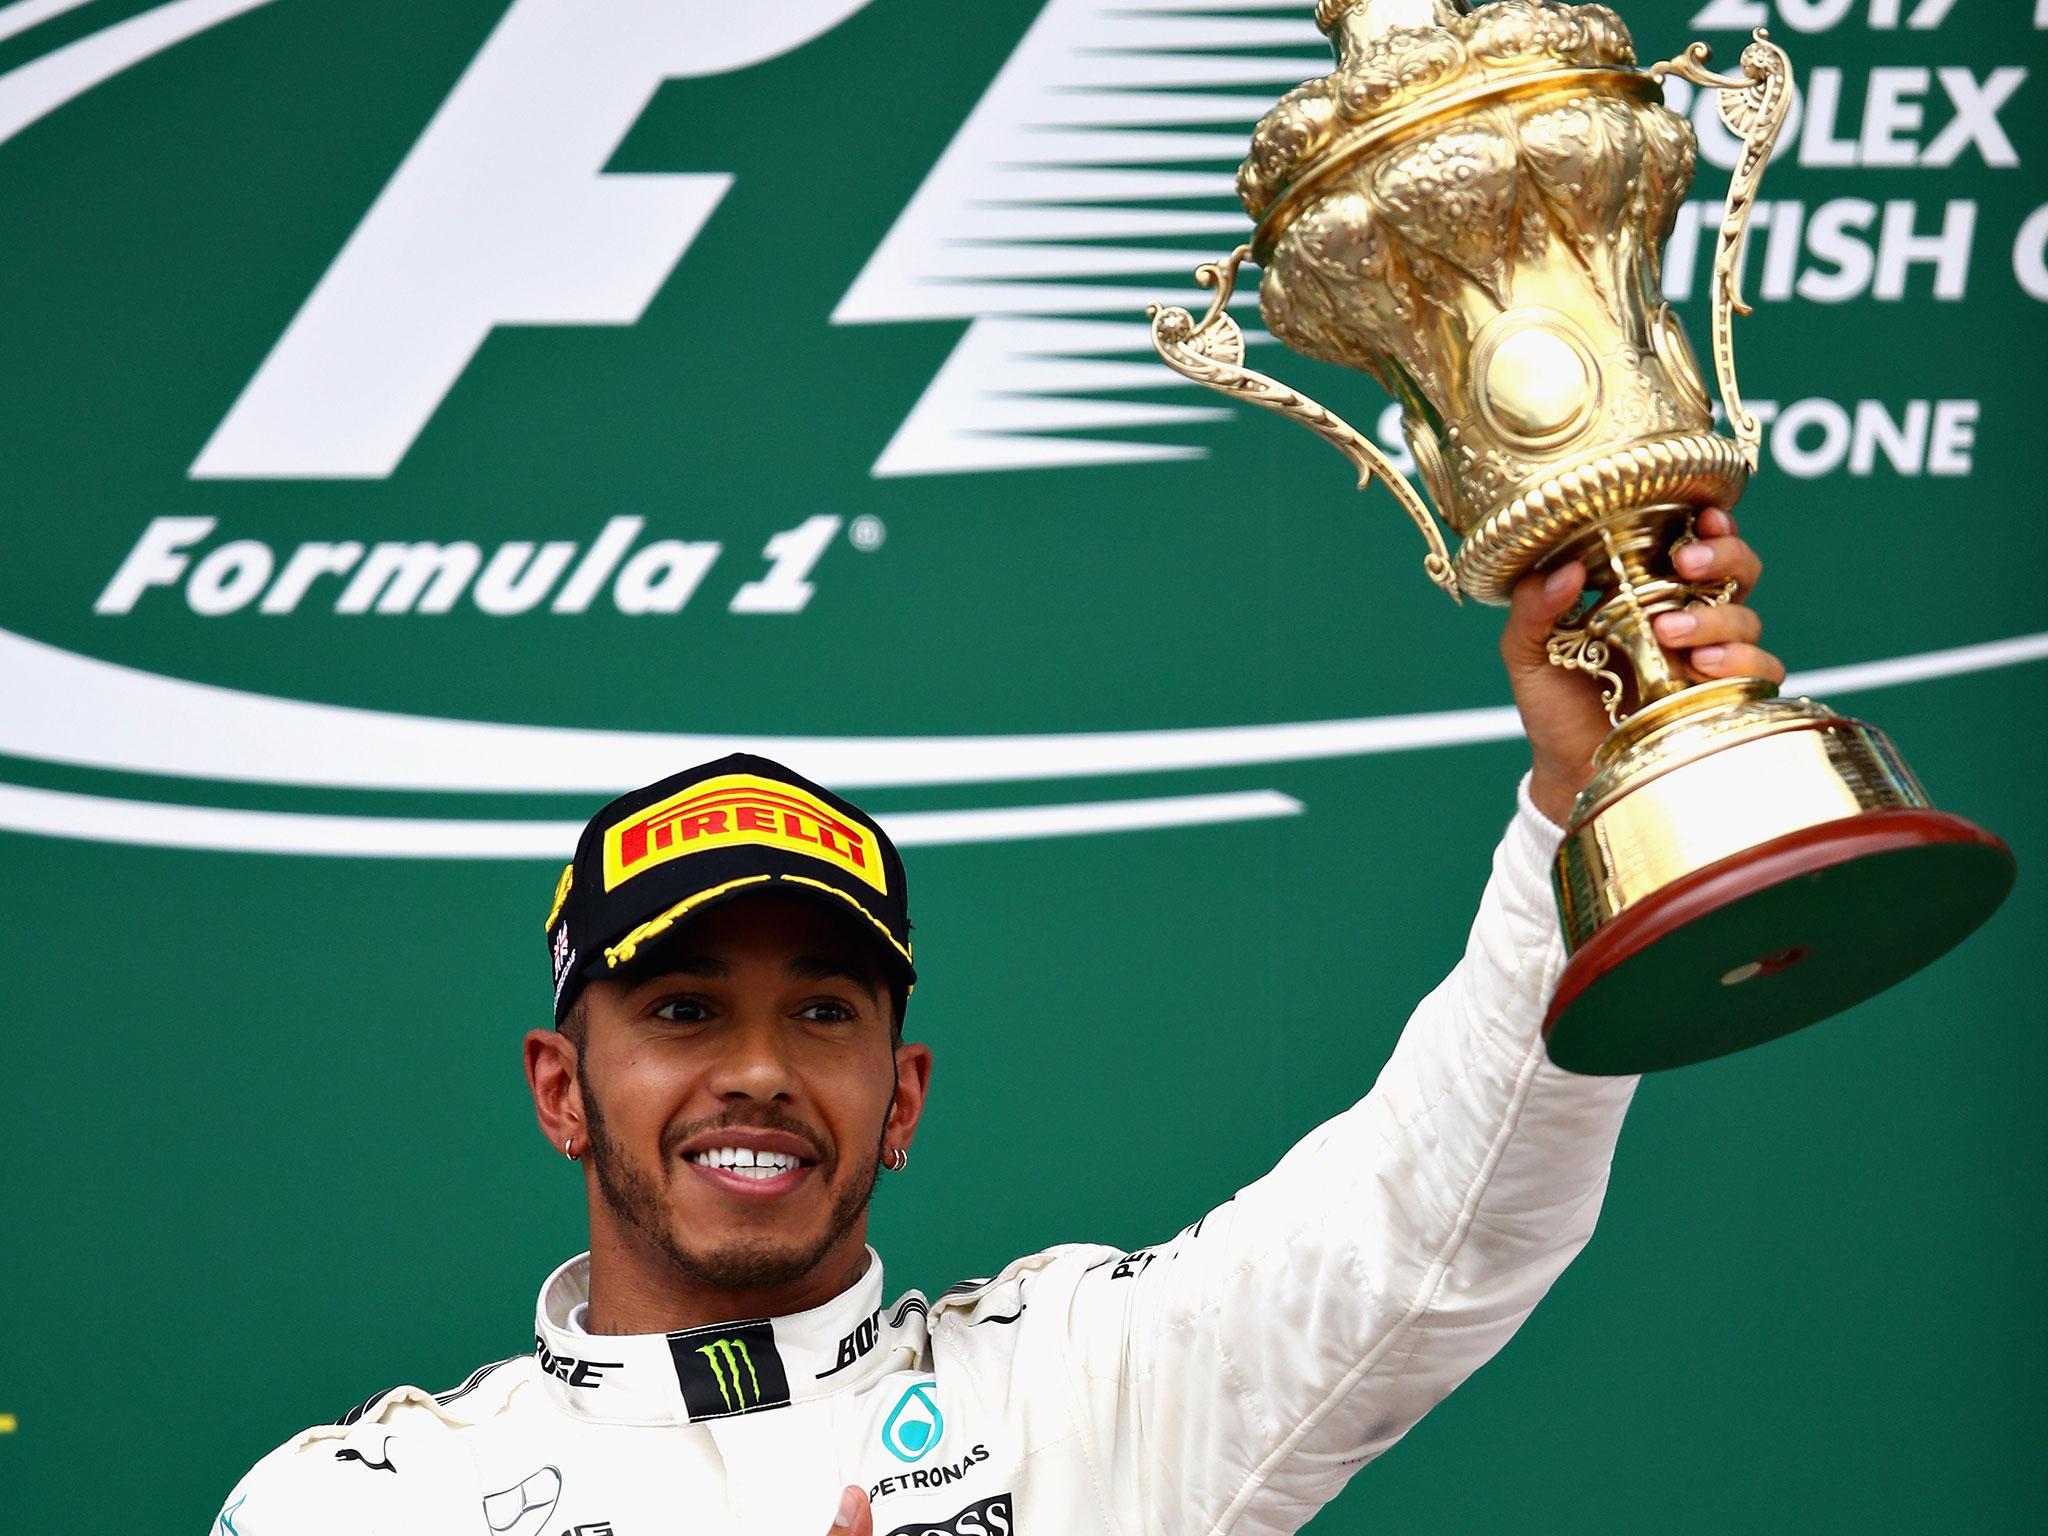 Lewis Hamilton led from lights to flag to throw the championship wide open